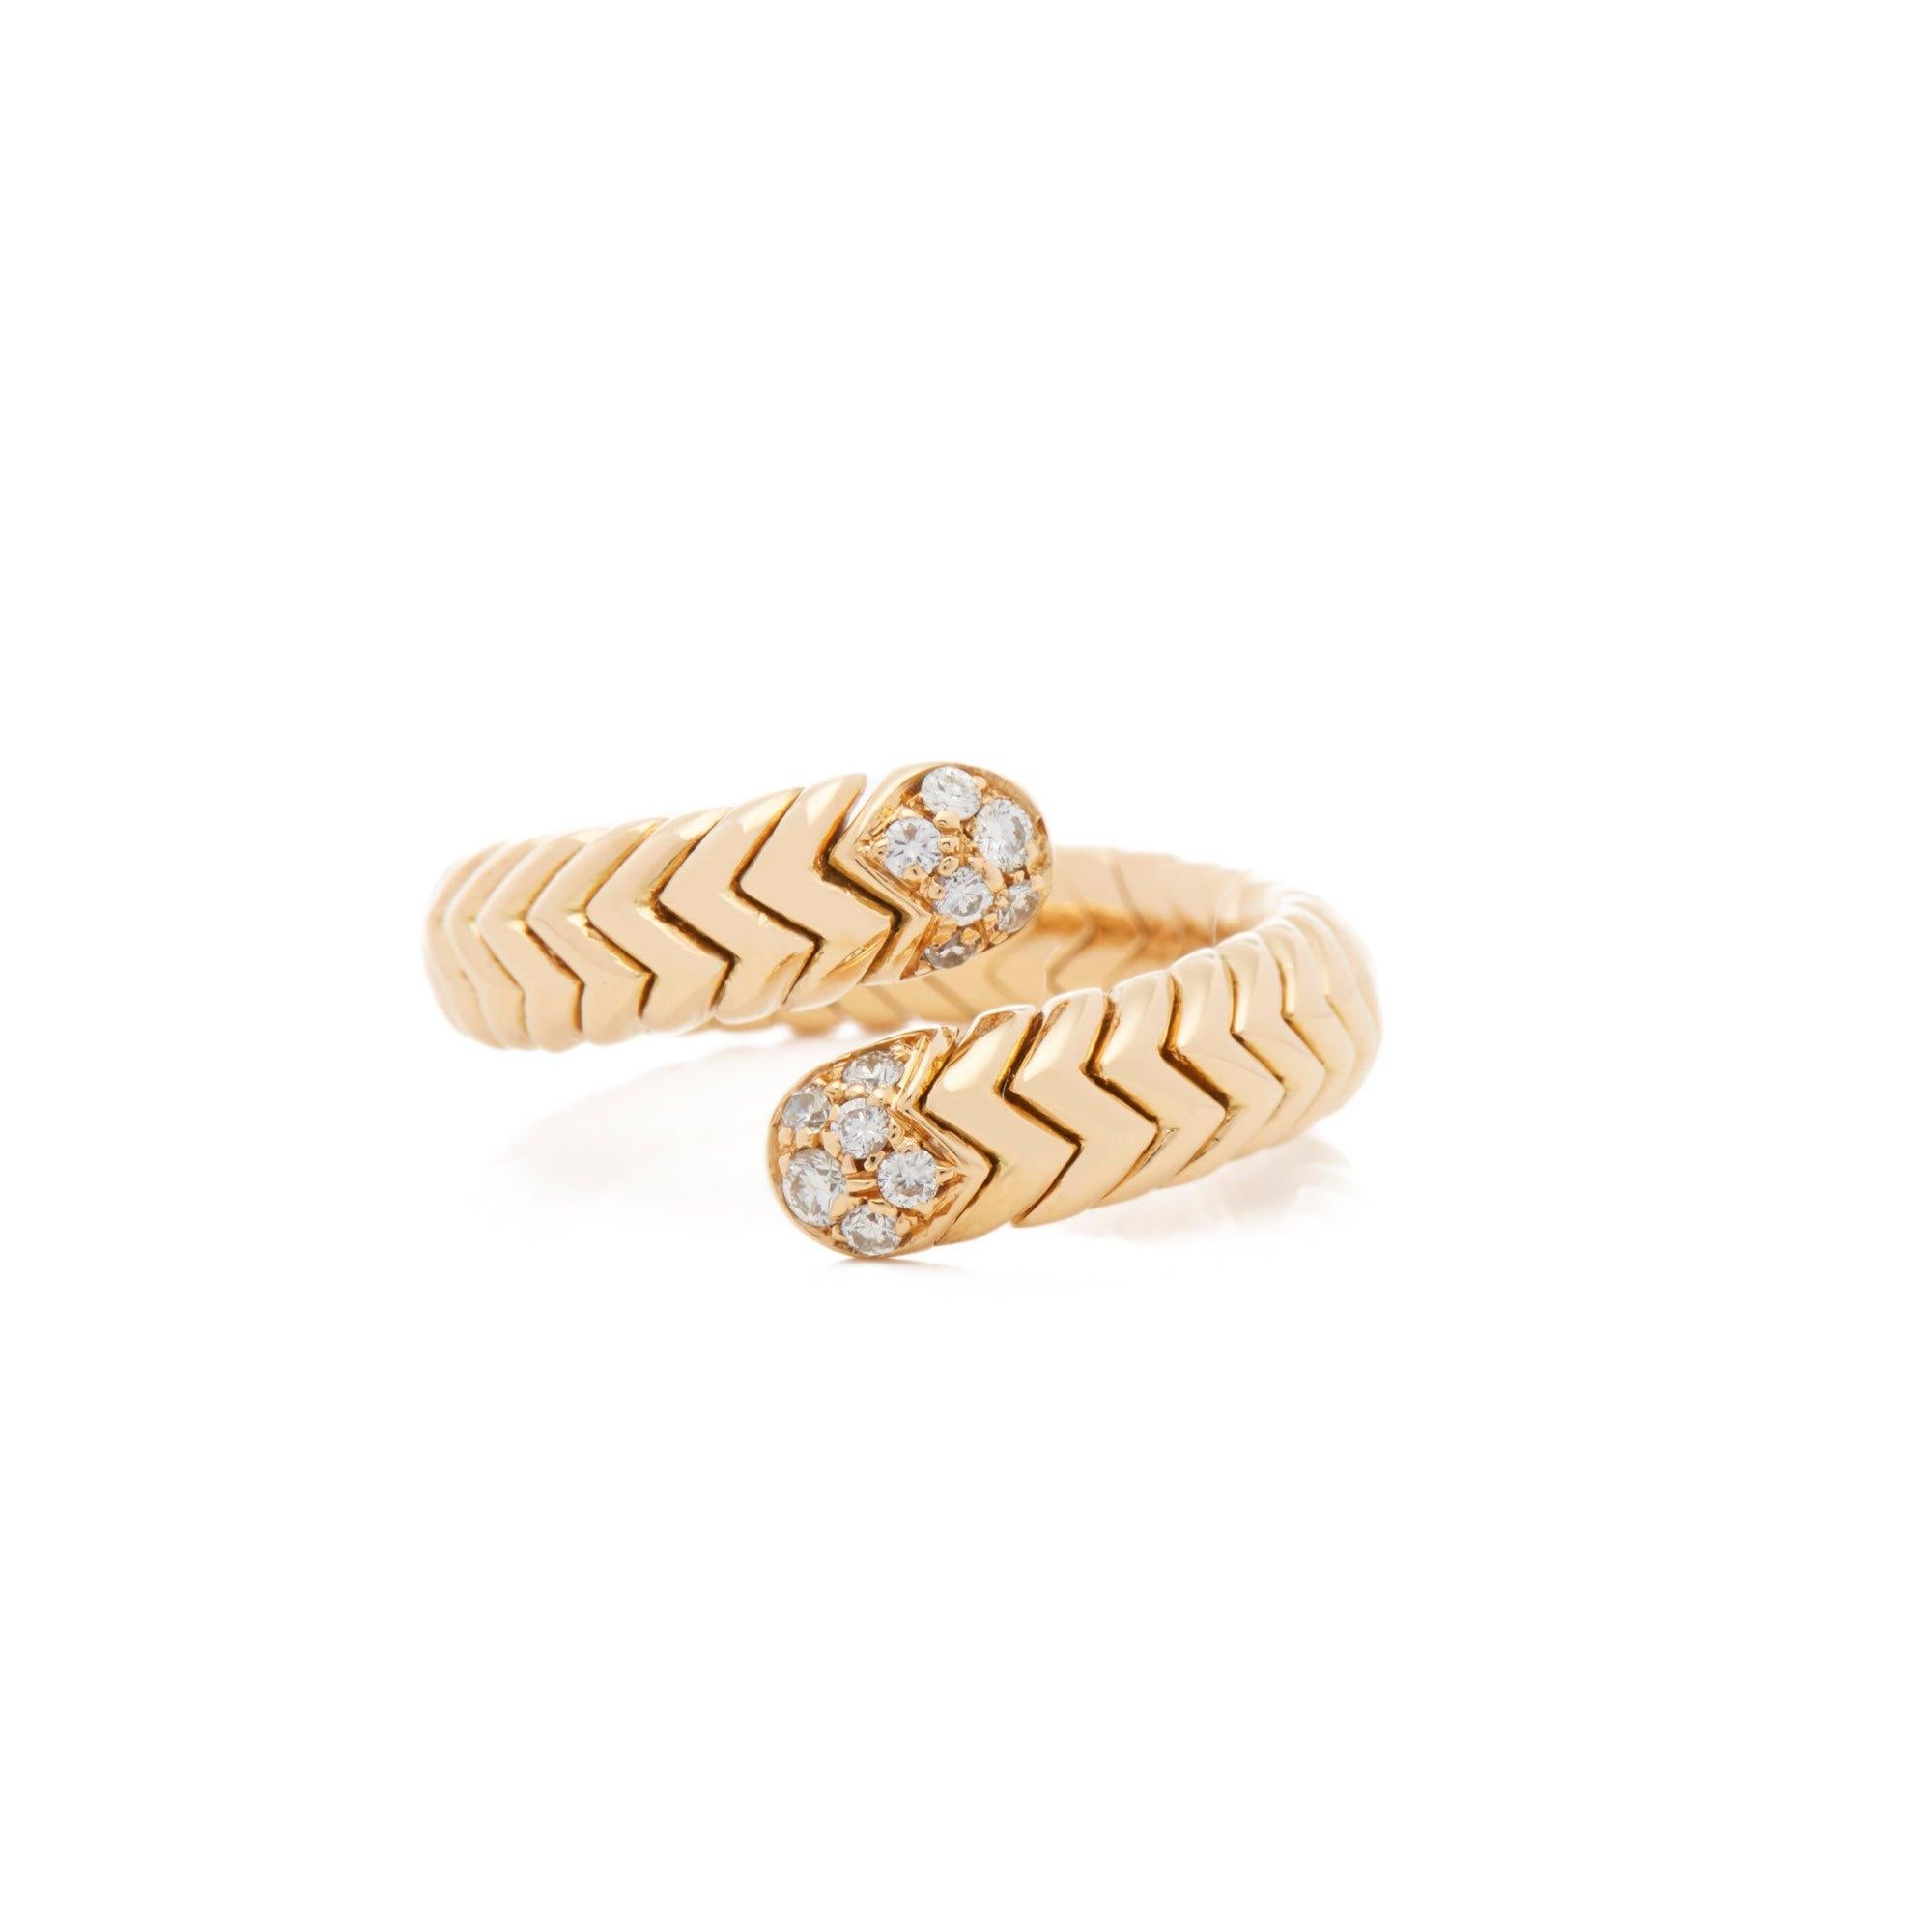 This Ring by Bulgari is from their Serpenti collection and features Twelve Round Brilliant Cut Diamonds Totalling 0.30cts mounted in an 18k Yellow Gold band. UK Finger Size P, EU SIze 57, USA Size 8. Complete with Xupes Presentation Box. Our Xupes